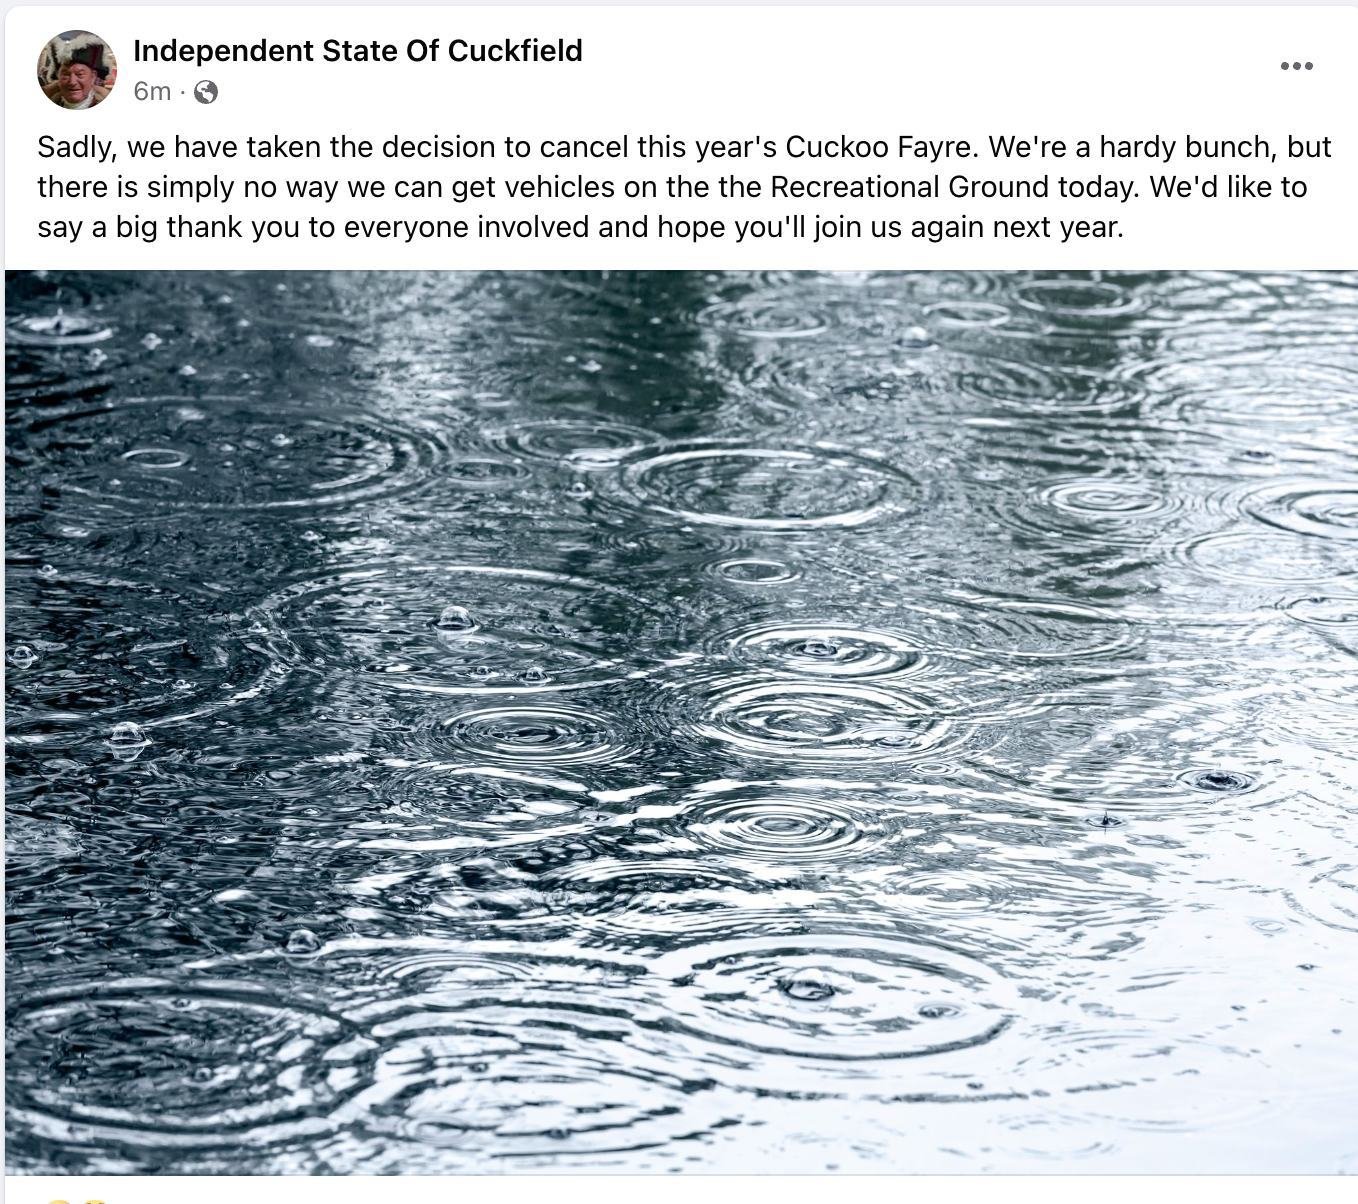 #Cuckoo Fayre cancelled today! Due to bad weather. The Independent State of Cuckfield organisers released a statement at 8am this morning. So gutted for them, but totally understand.